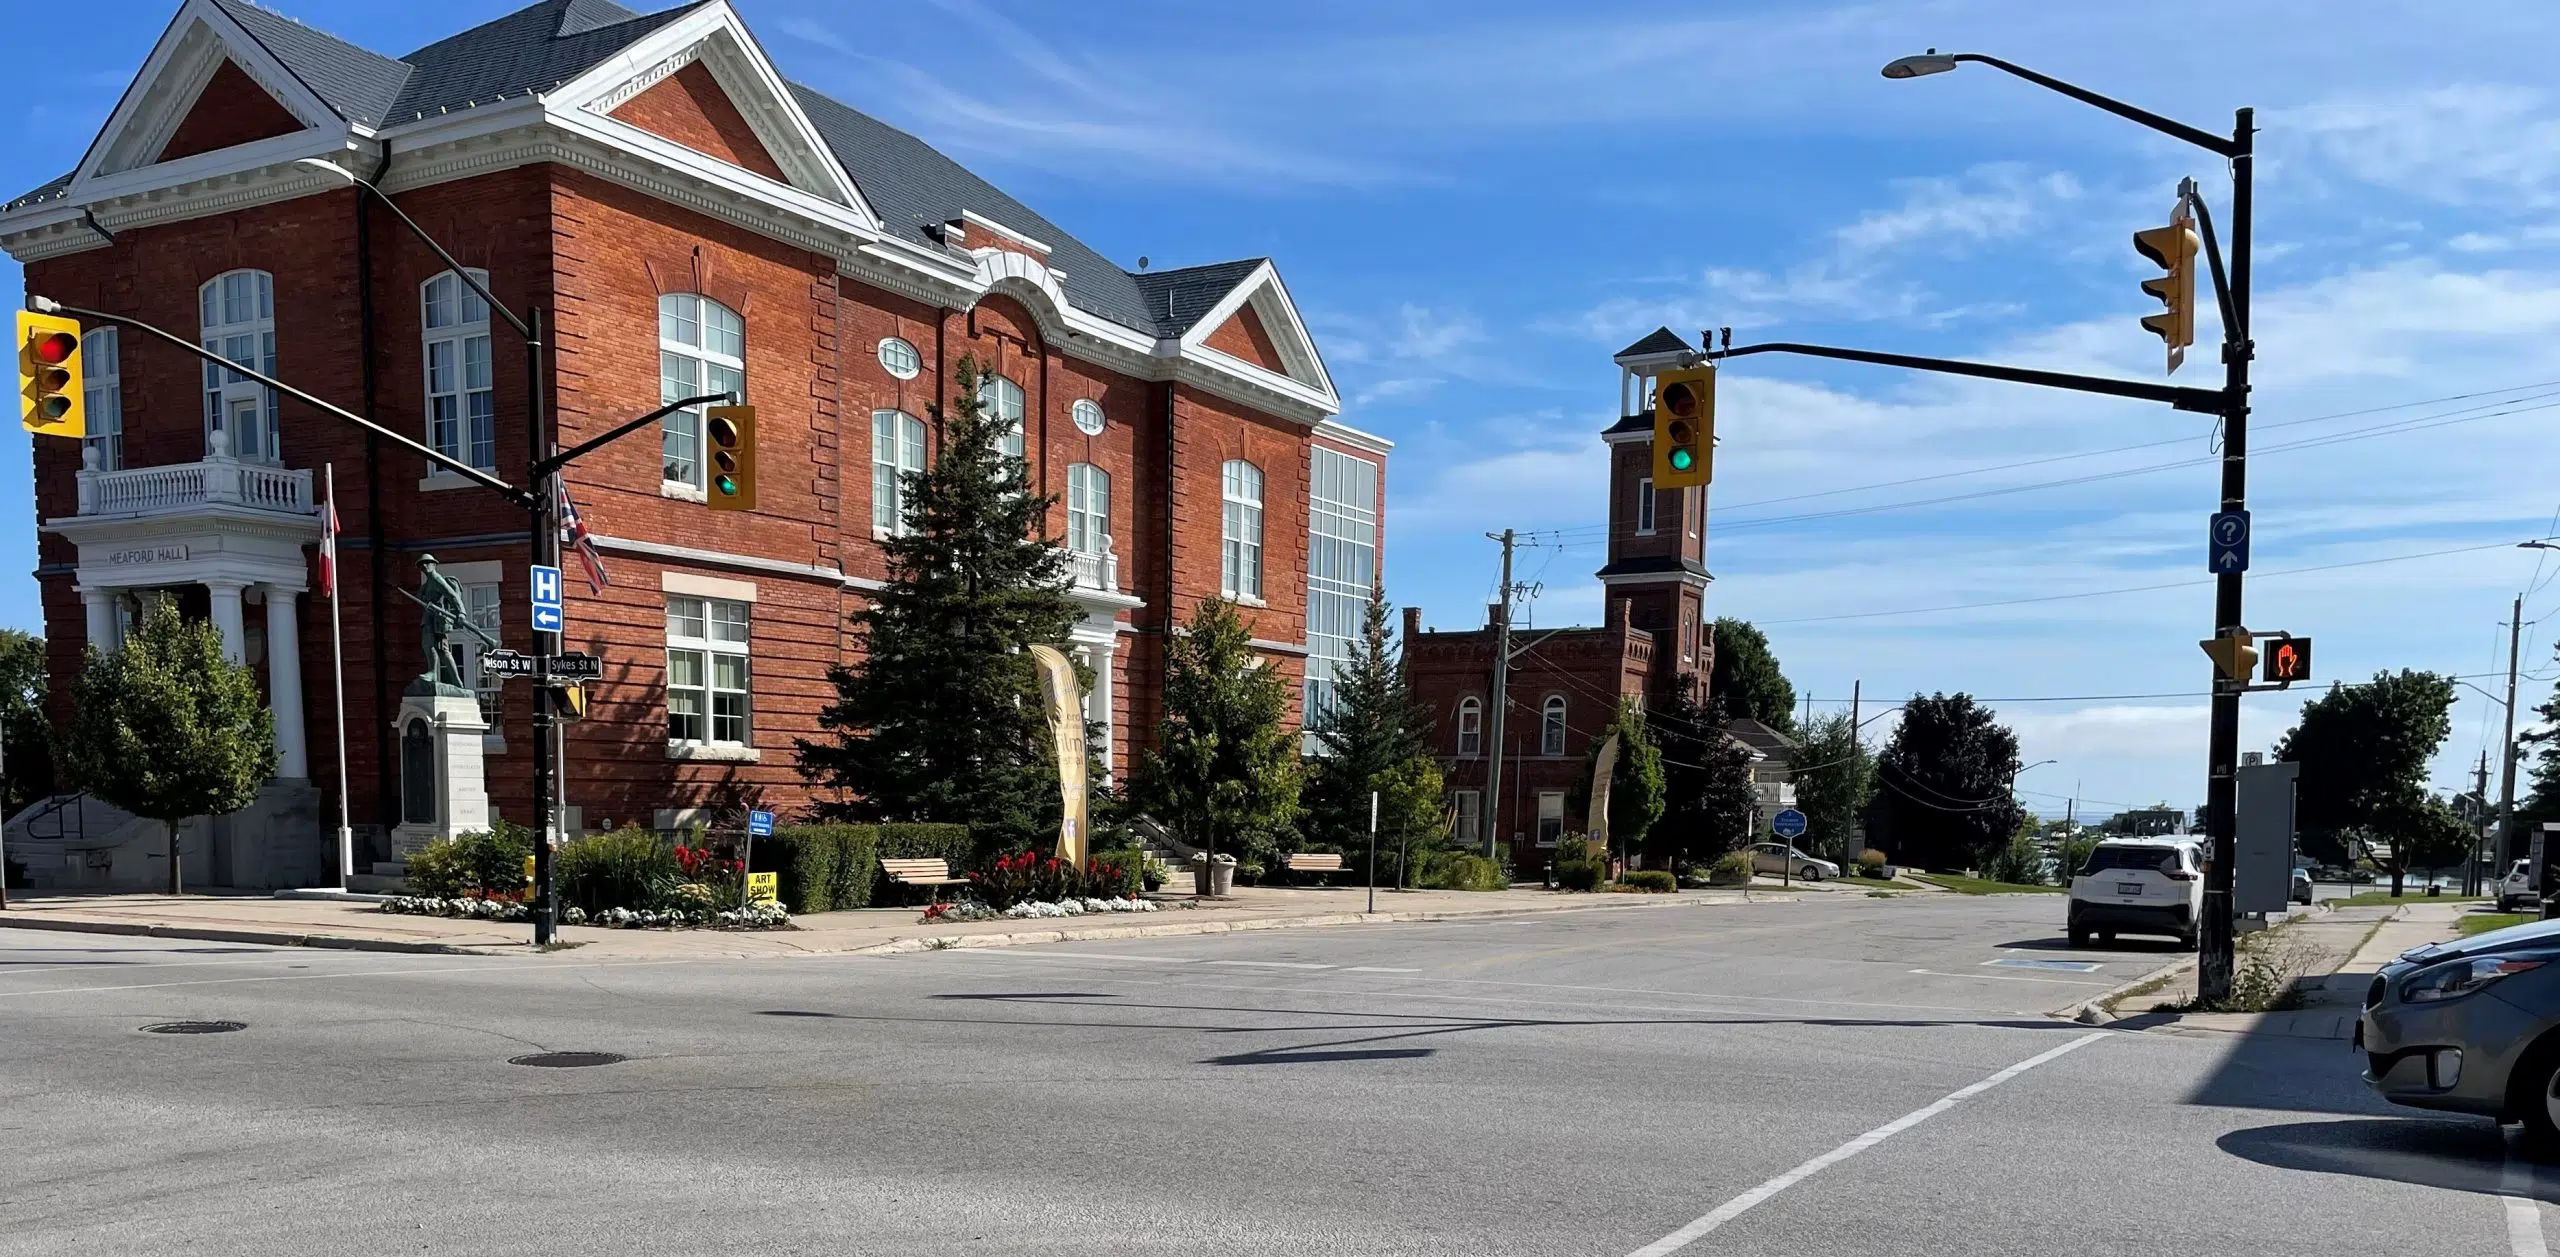 Meaford To Install New "Indigenous Crosswalk"